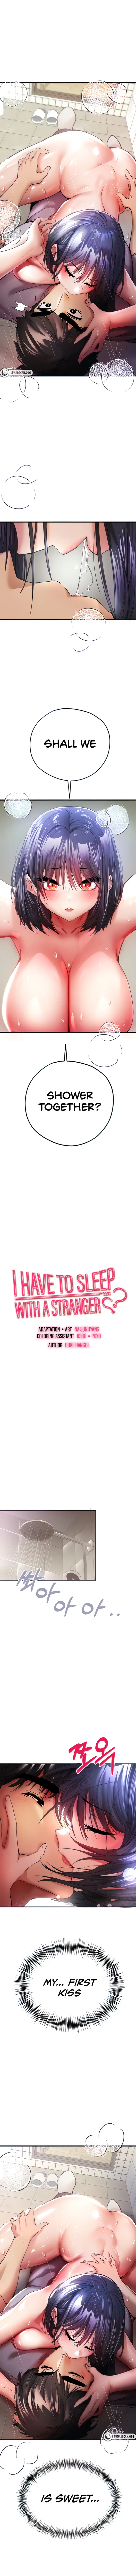 i-have-to-sleep-with-a-stranger-chap-17-0